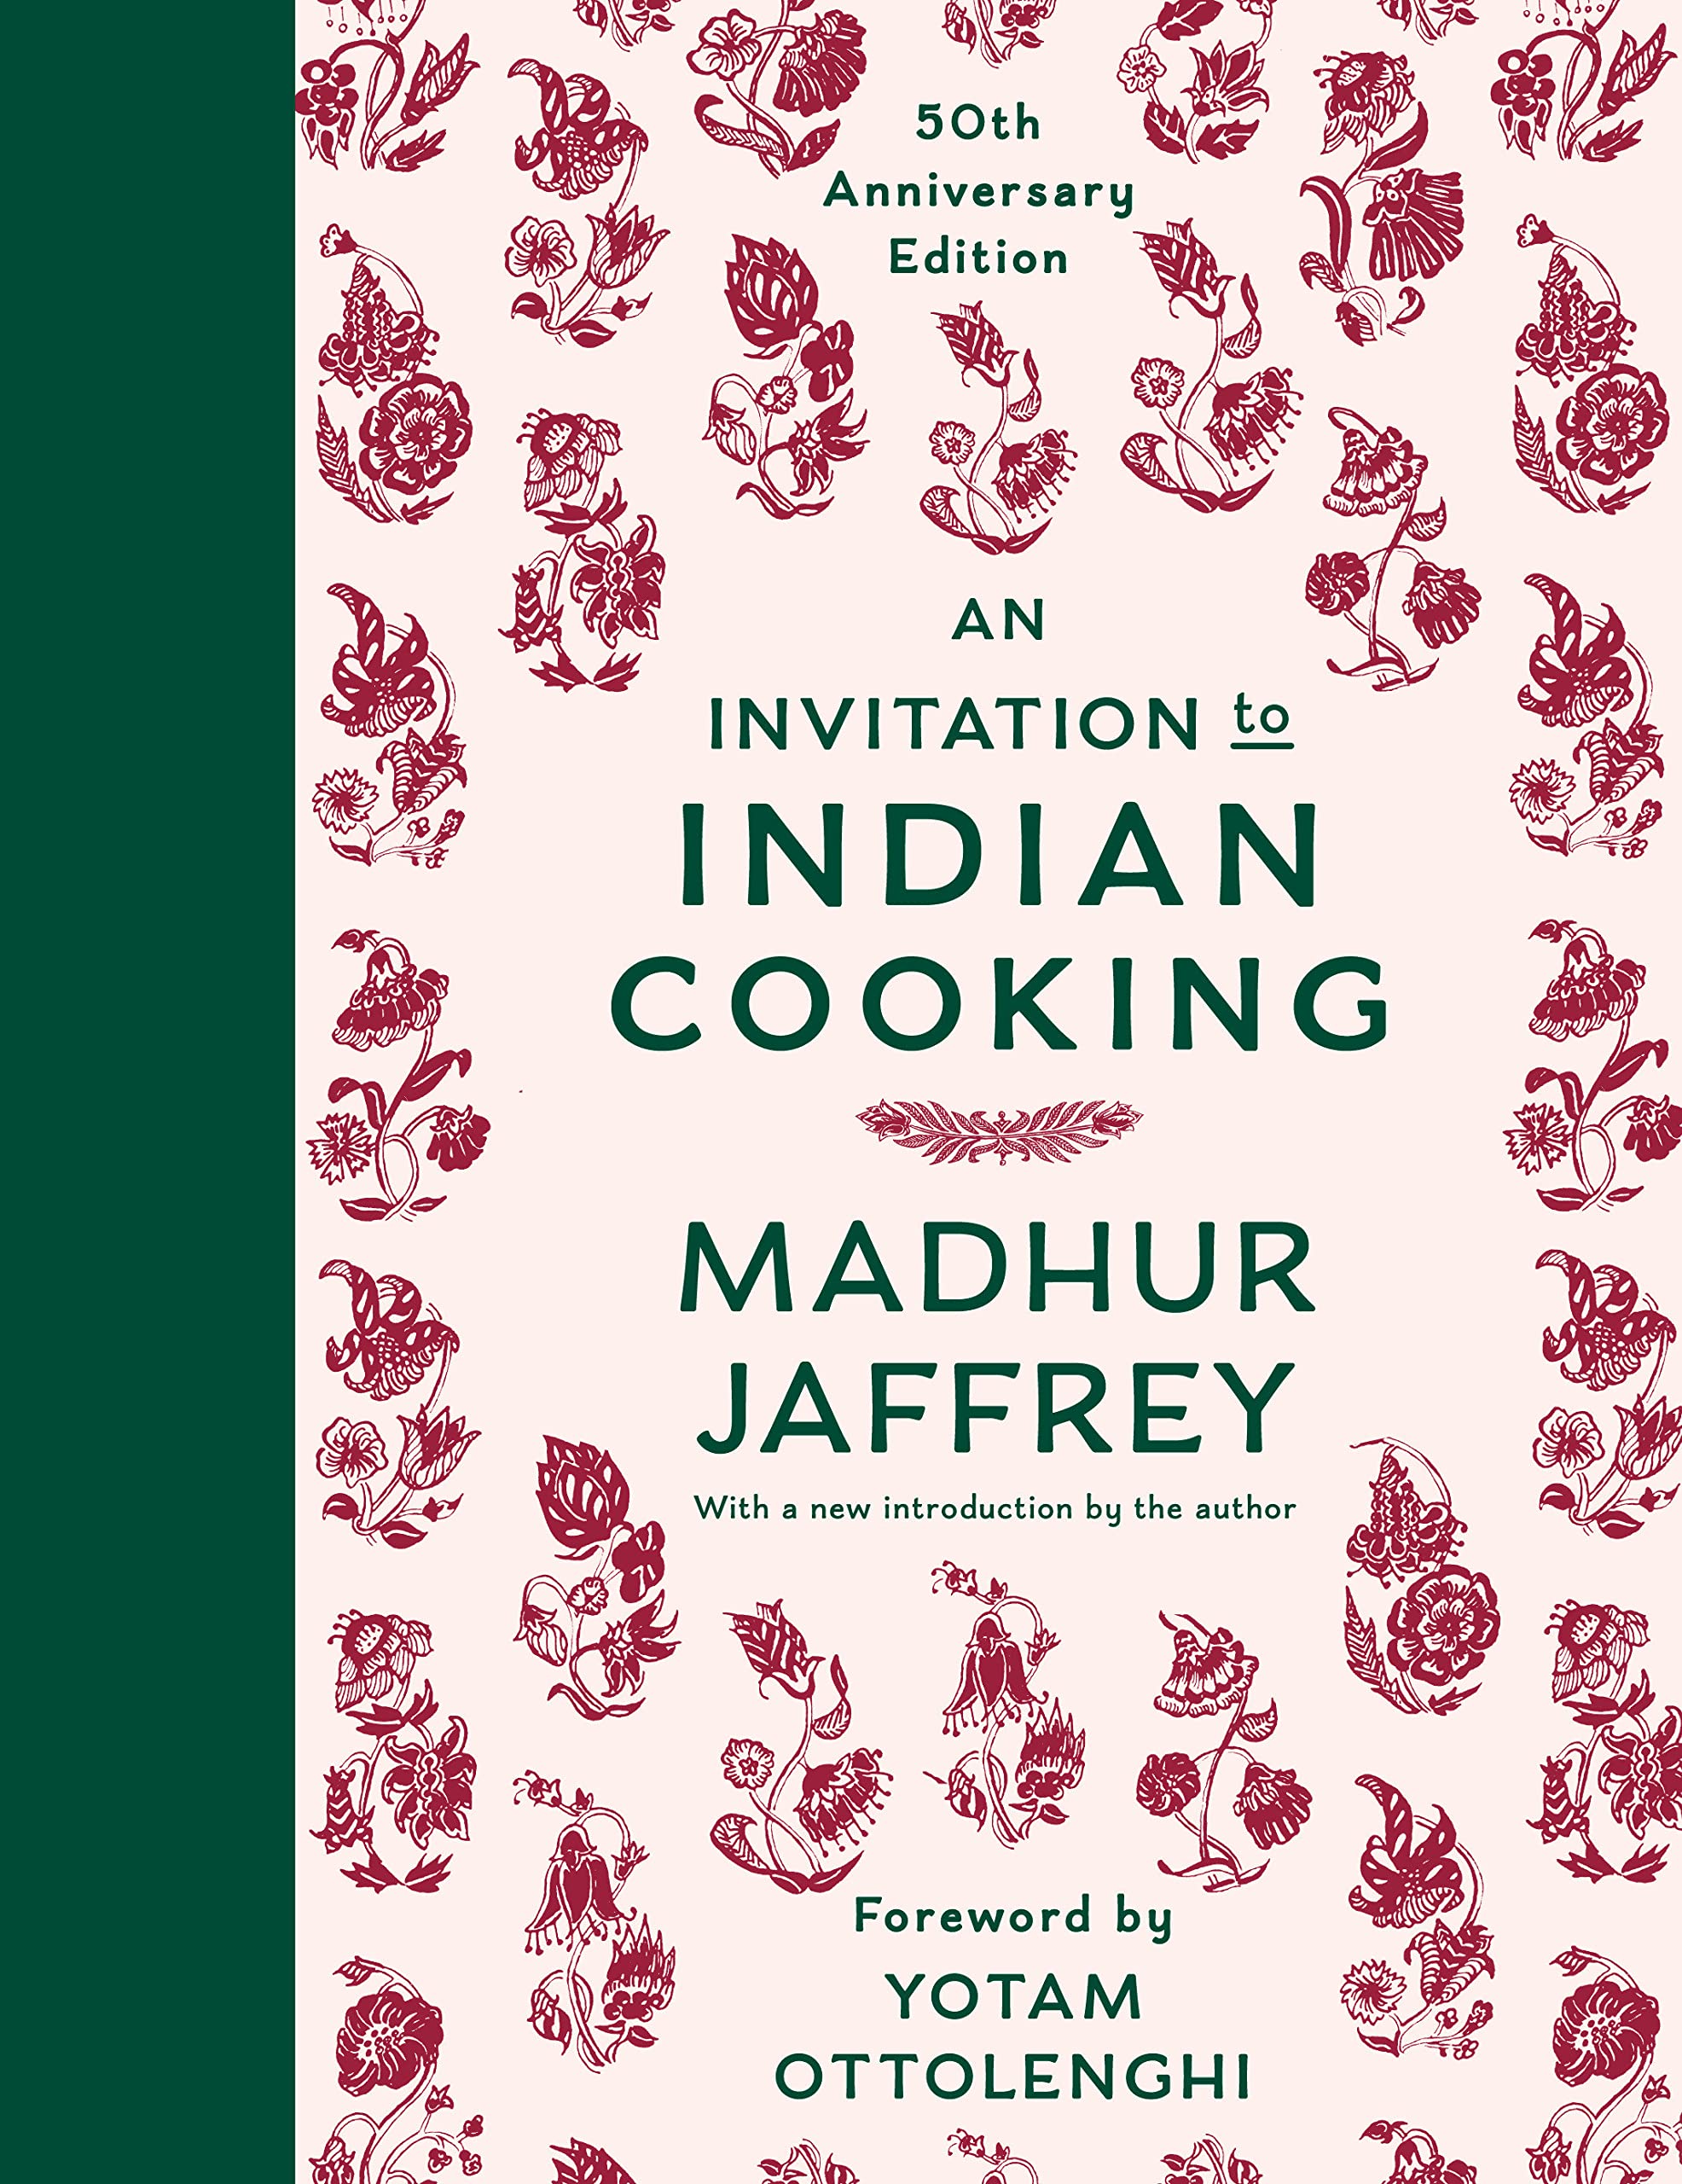 An Invitation to Indian Cooking: 50th Anniversary Edition (Madhur Jaffrey)